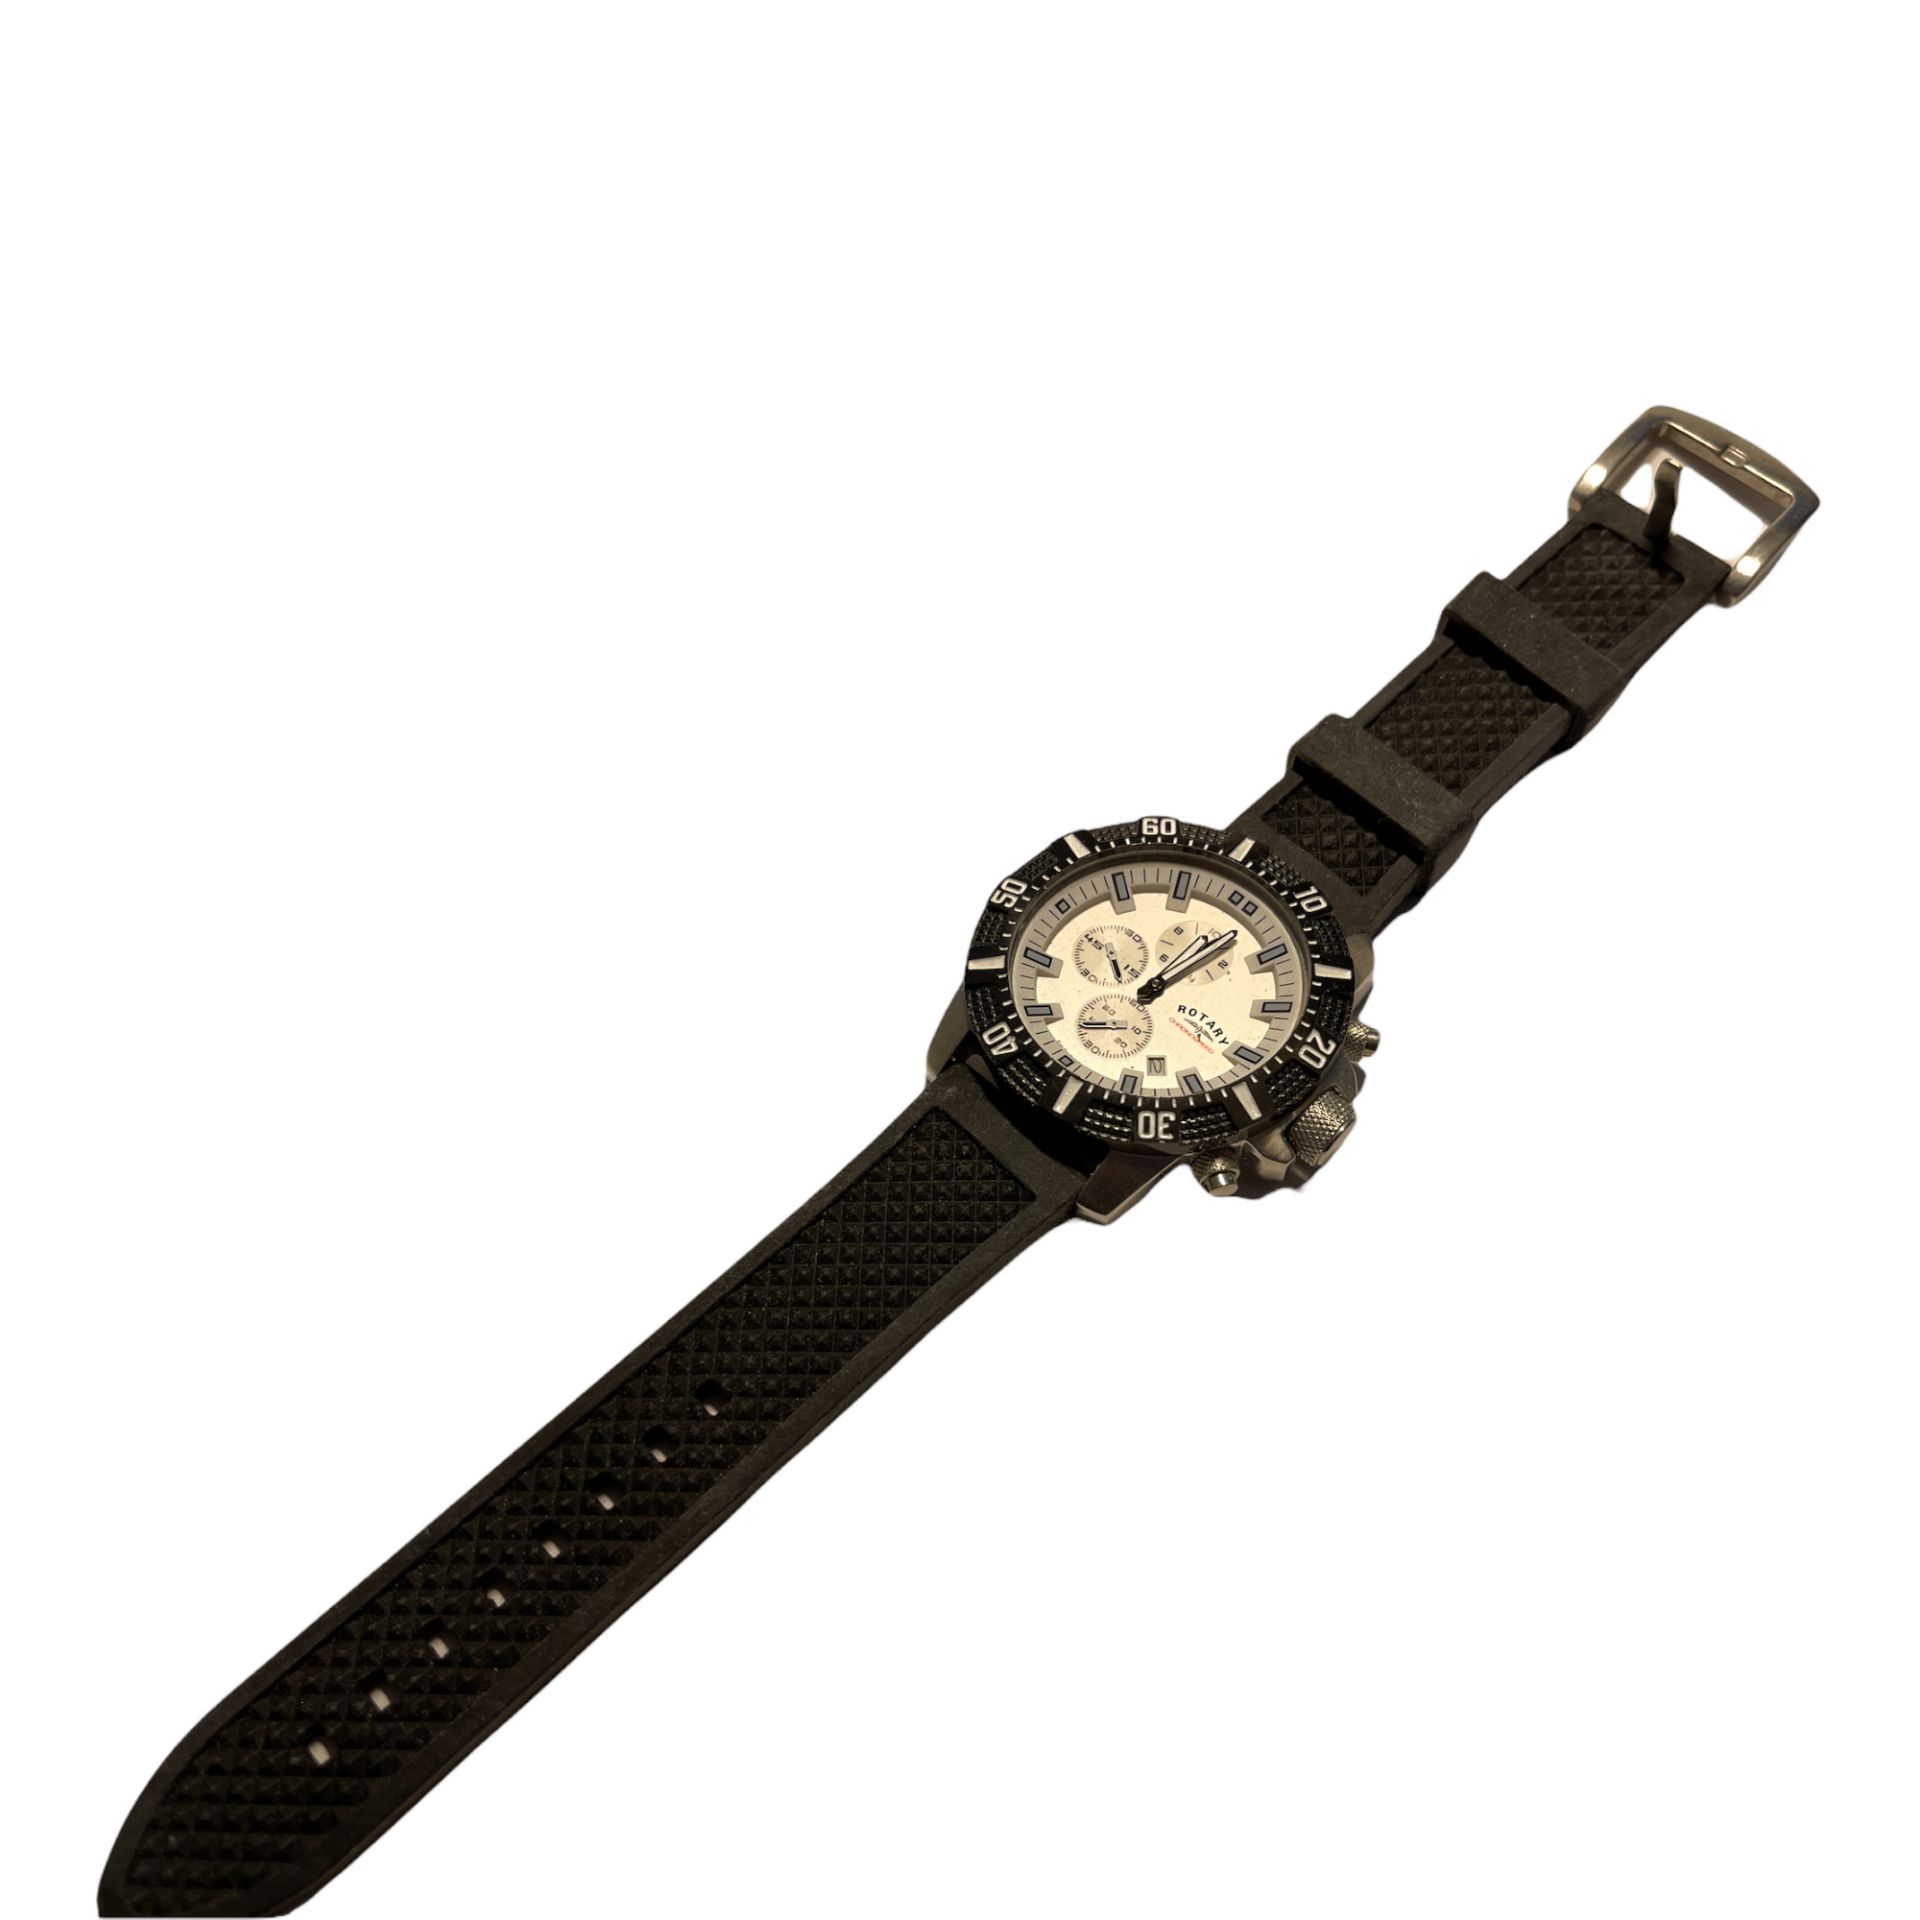 Lost property from our airline. Rotary men's divers watch - Image 2 of 6